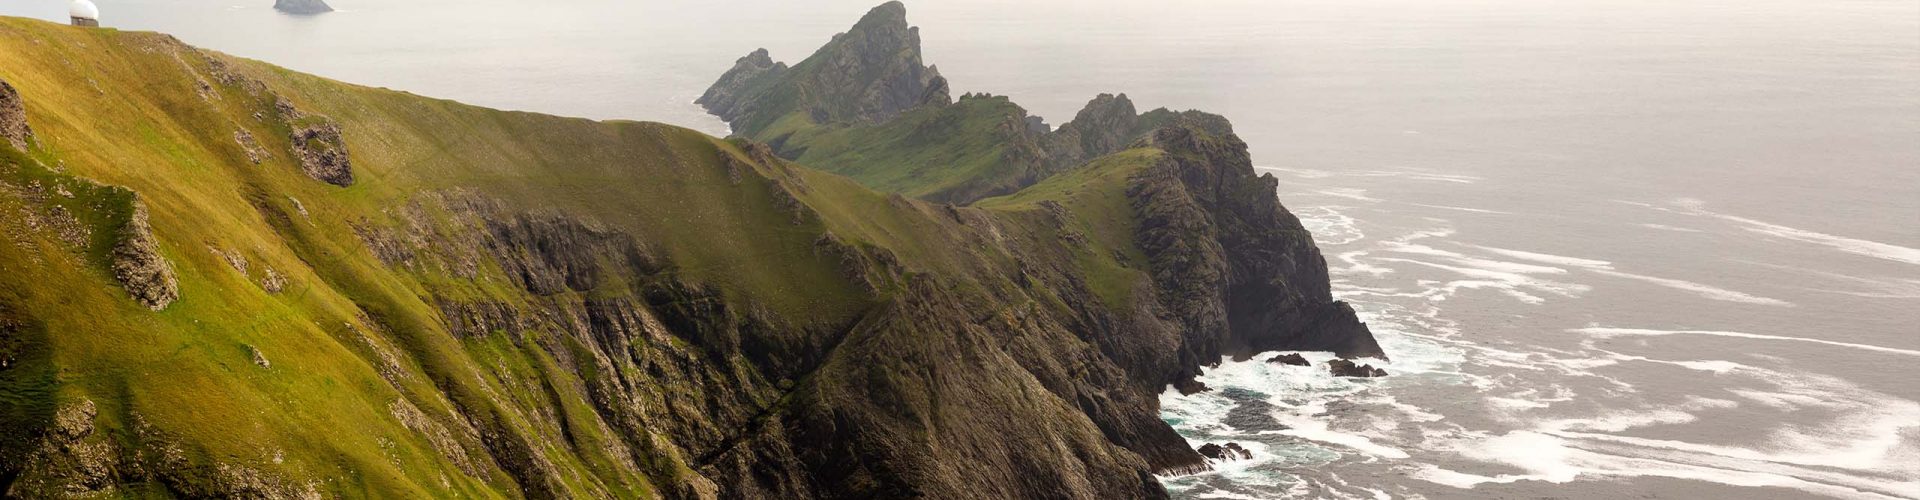 Steep cliffs on St Kilda that contain the largest colony of Gannets